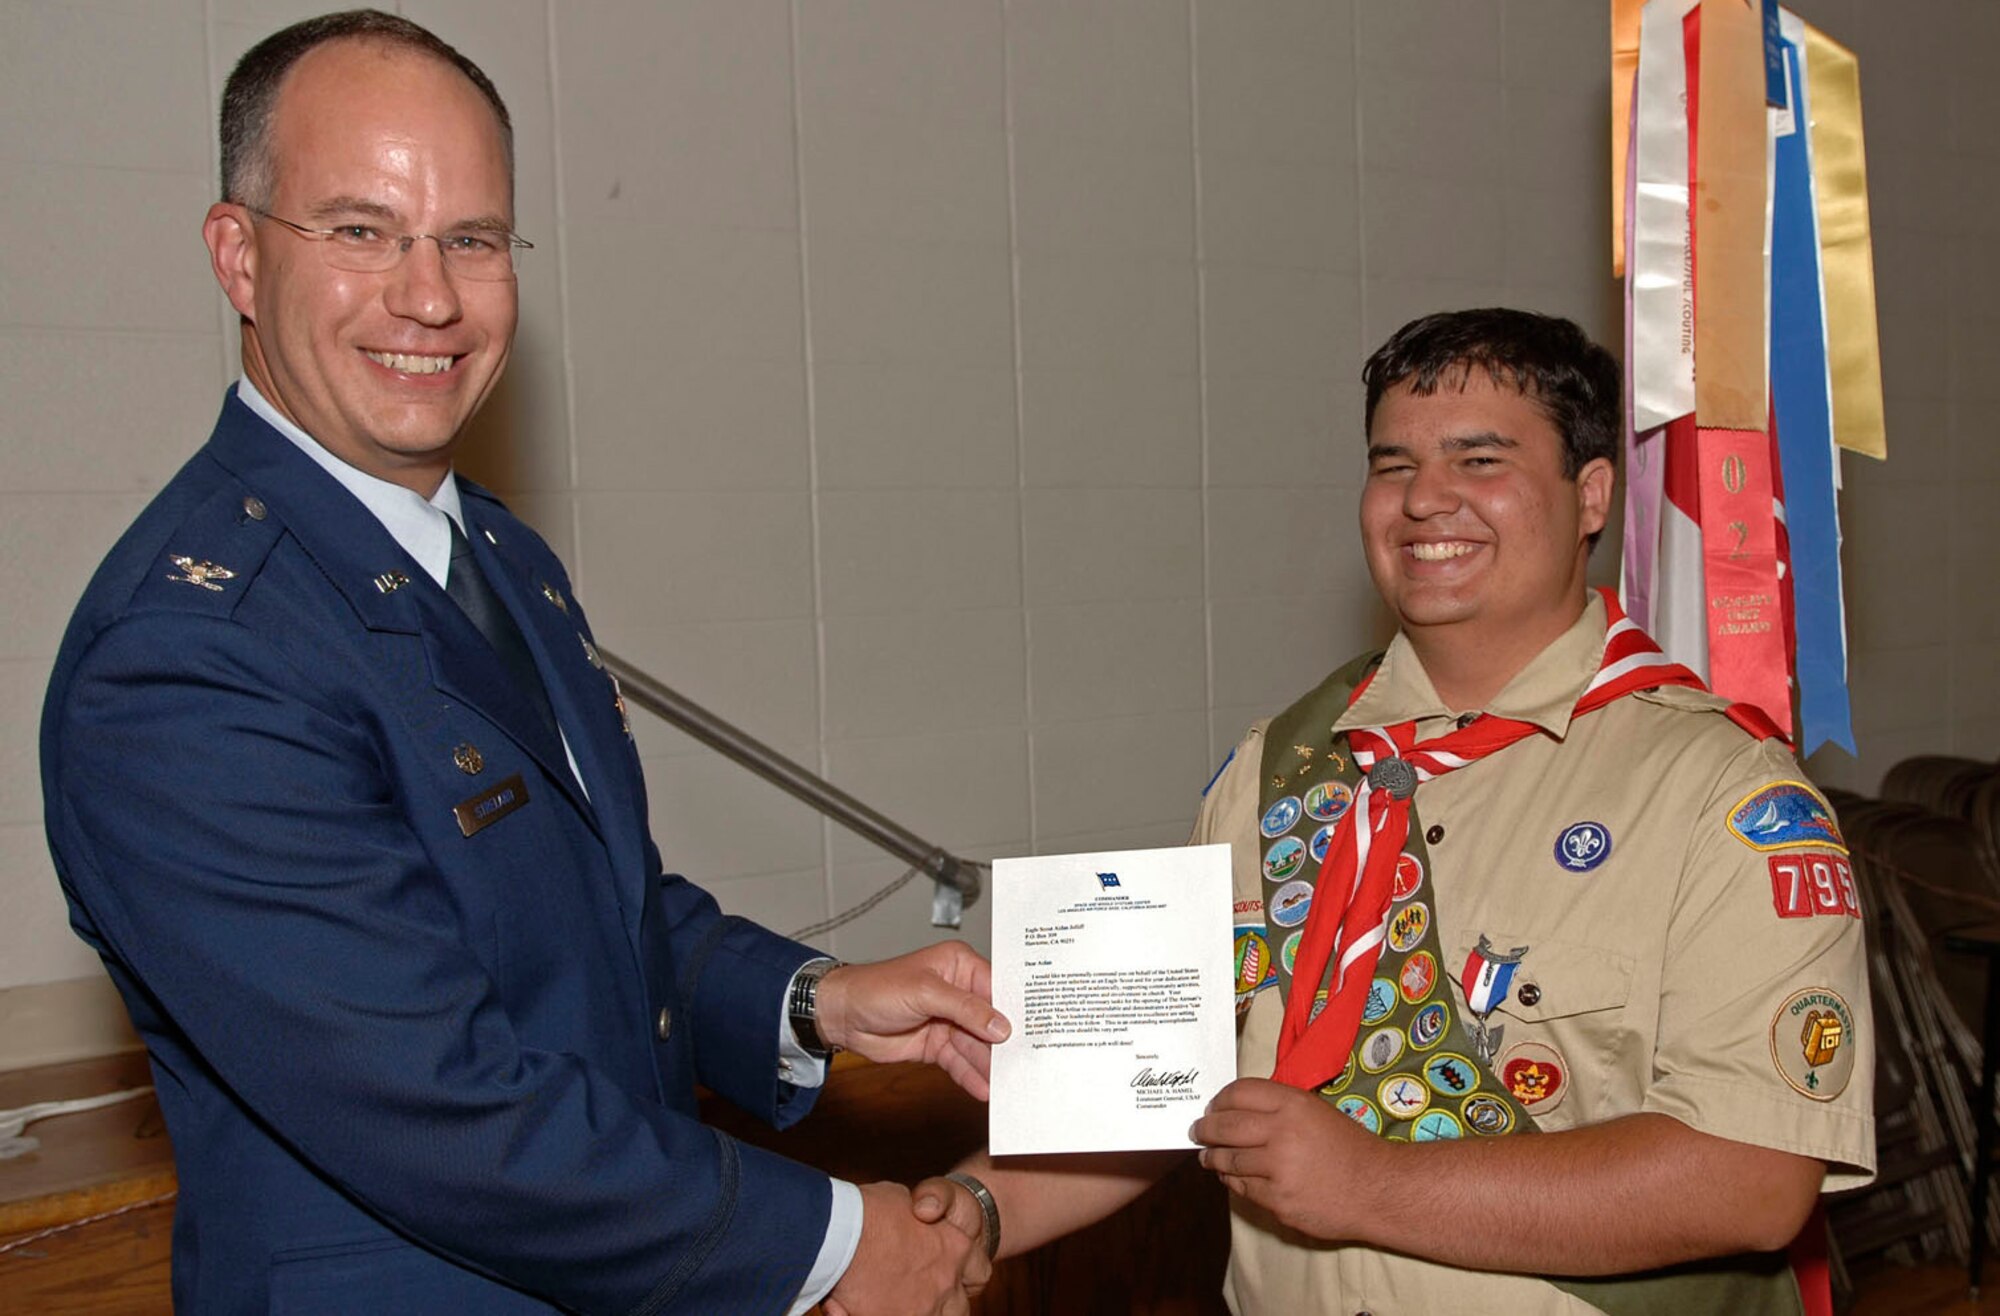 Colonel Arnold Streland, MILSATCOM Systems Wing, presented a letter of appreciation from Lt. Gen Hamel and a SMC coin to H. Aidan Jolliff, an Eagle Scout and member of Lawndale Scout Troop 795, at an Eagle Scout Court of Honor ceremony, July 21. Aidan’s Eagle Scout project involved taking the Airman's Attic at Fort MacArthur from an empty room to a functioning facility. (Photo by Paul Testerman)